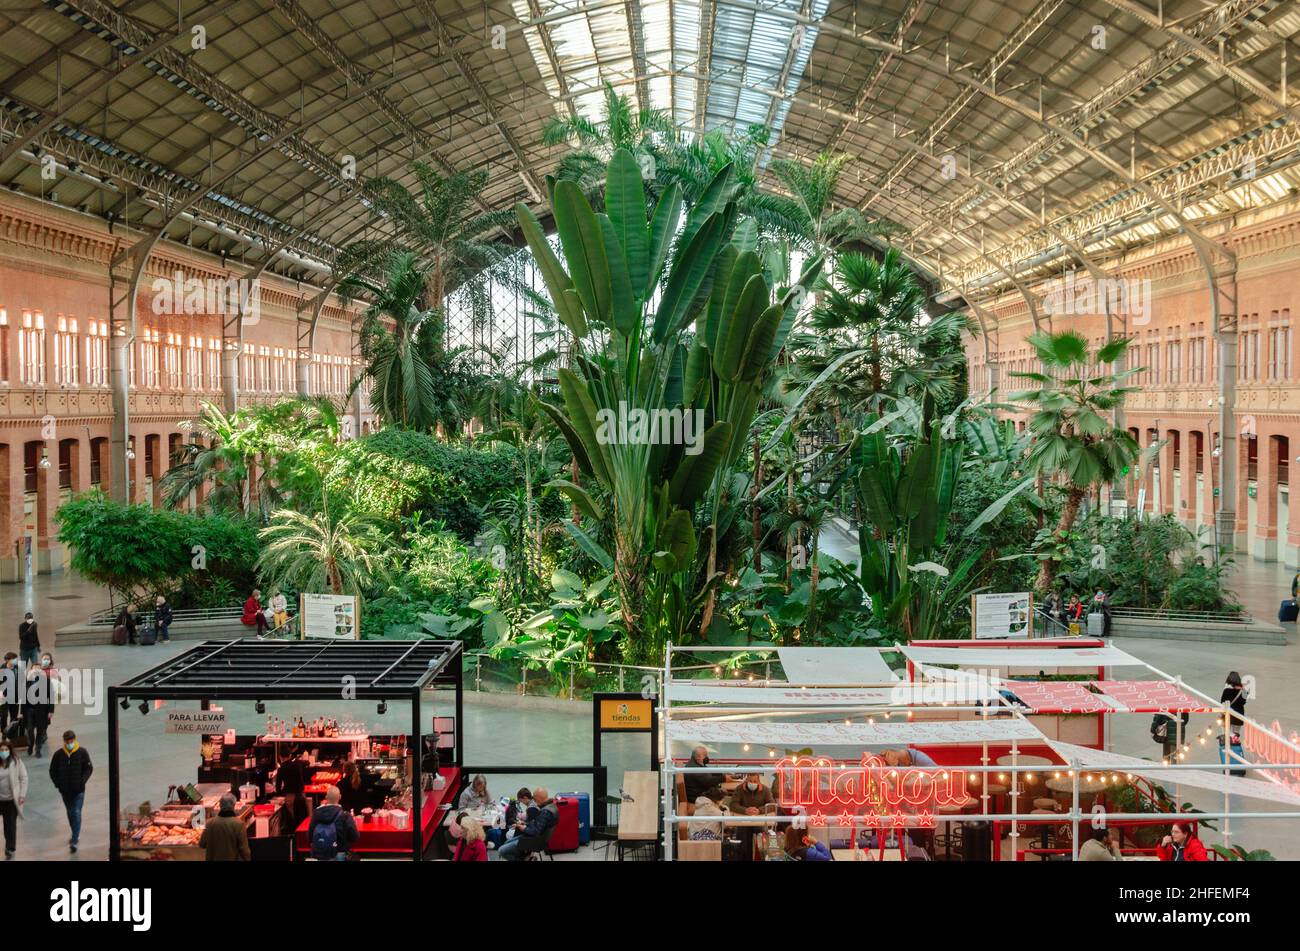 Madrid-Puerta de Atocha Train Station. Steel and glass construction with vivid tropical garden. Stock Photo